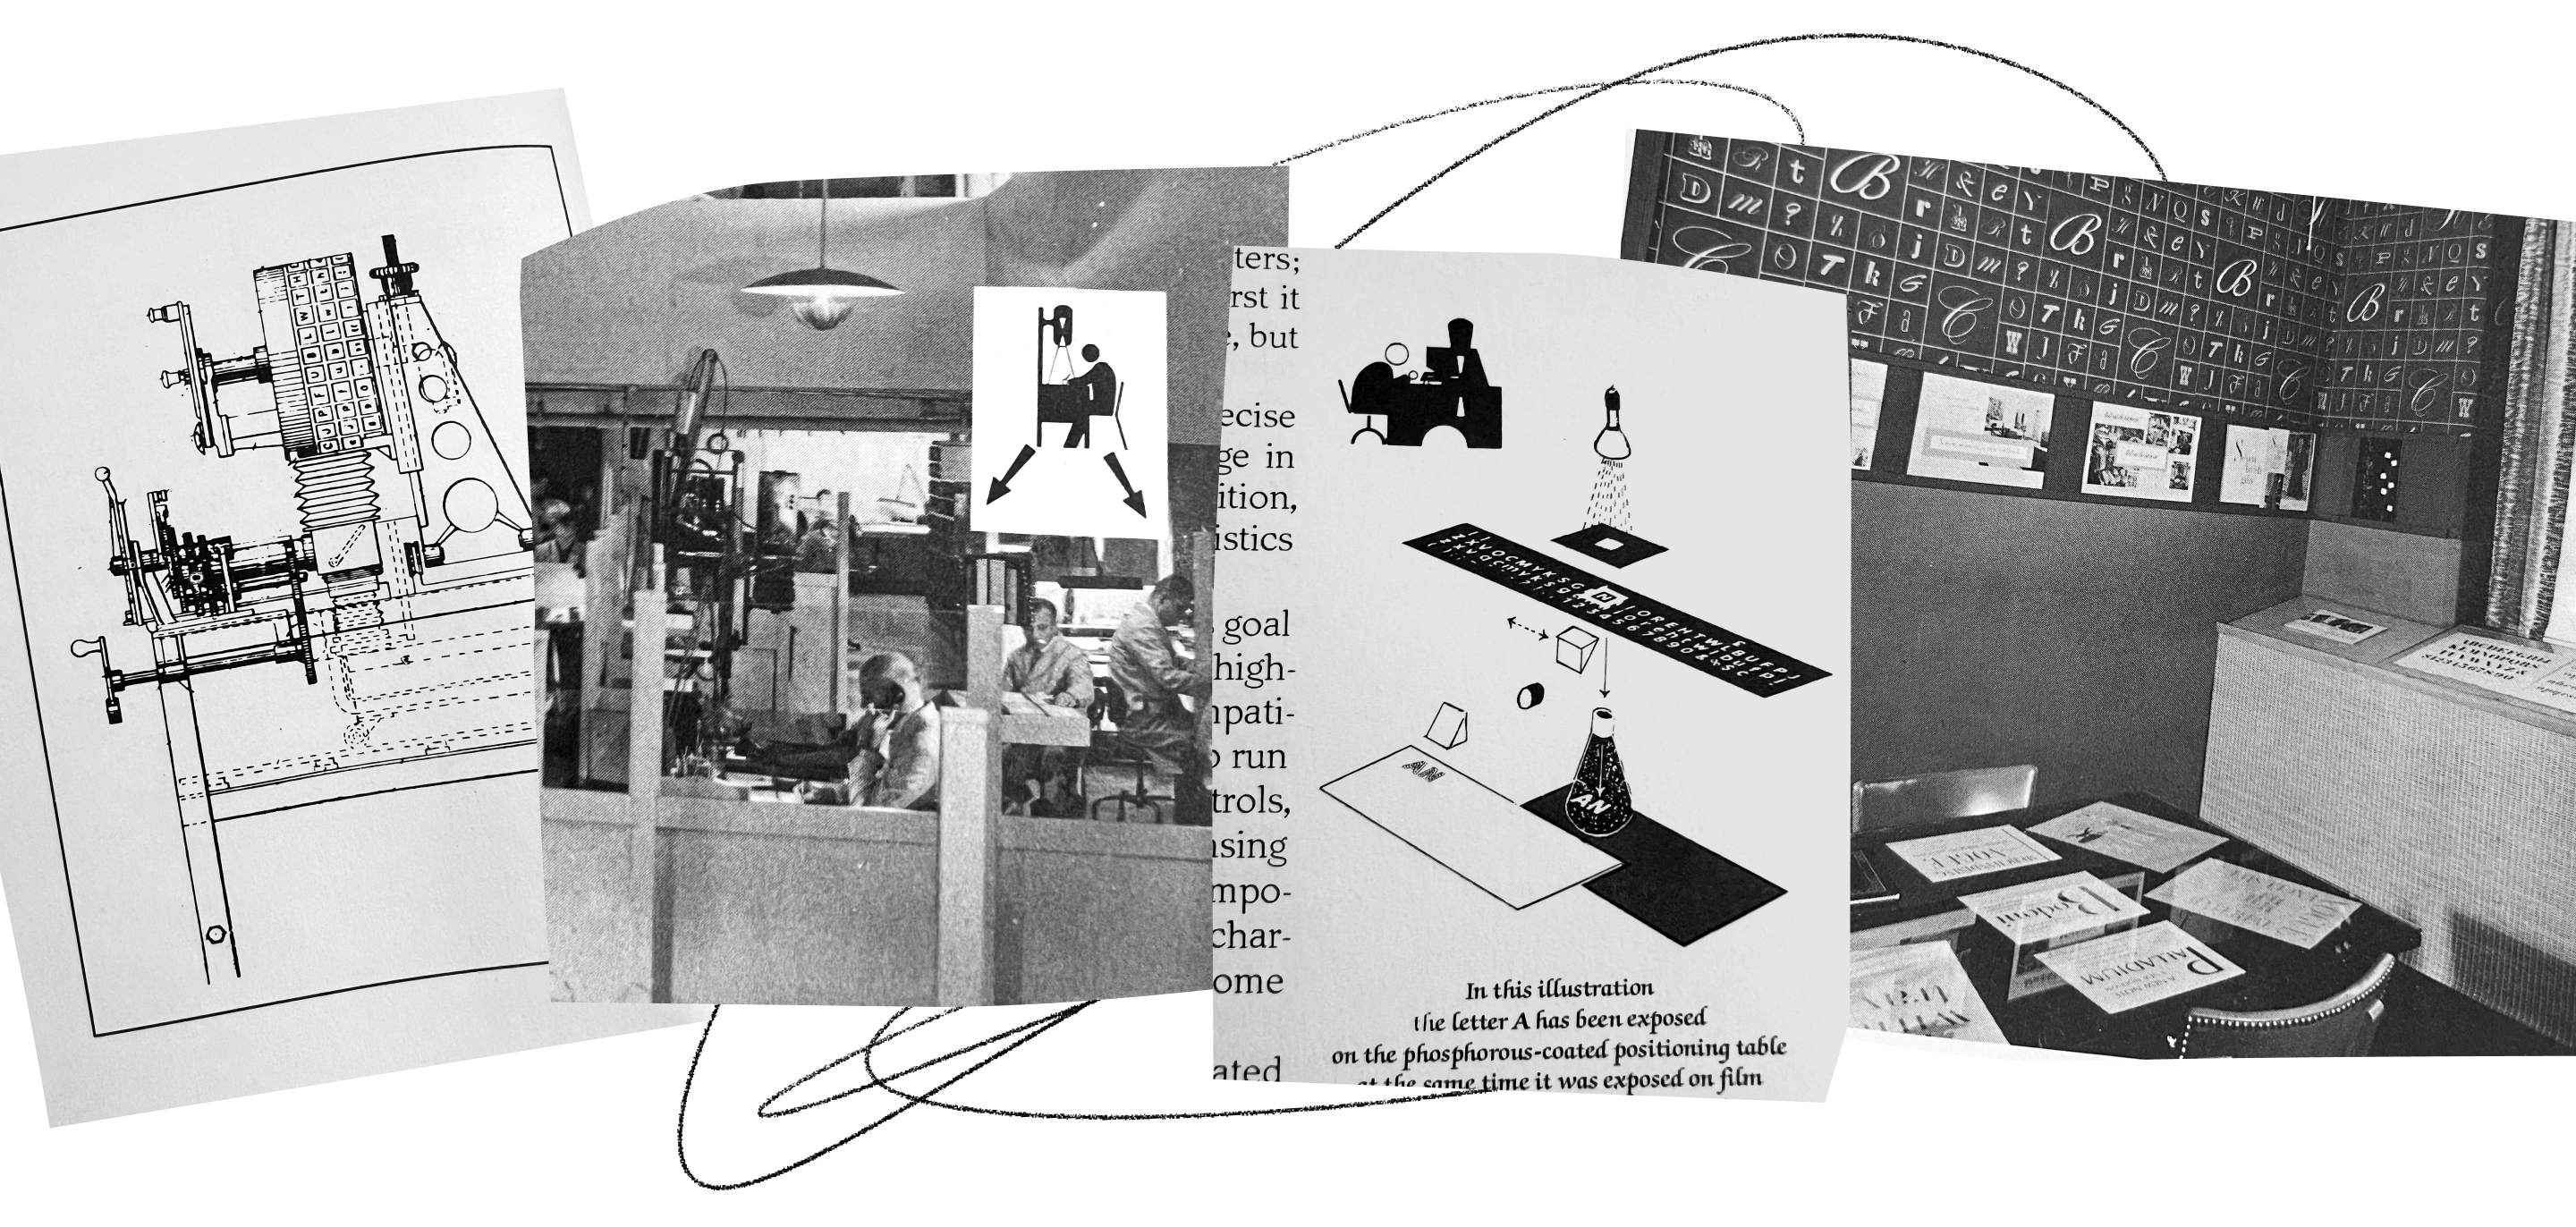 <b class="accent">FIG. 5 — </b> Photographs of the Photo-Lettering Incorporated offices and equipment, from Ed Rondthaler’s book ‘Life with Letters’.